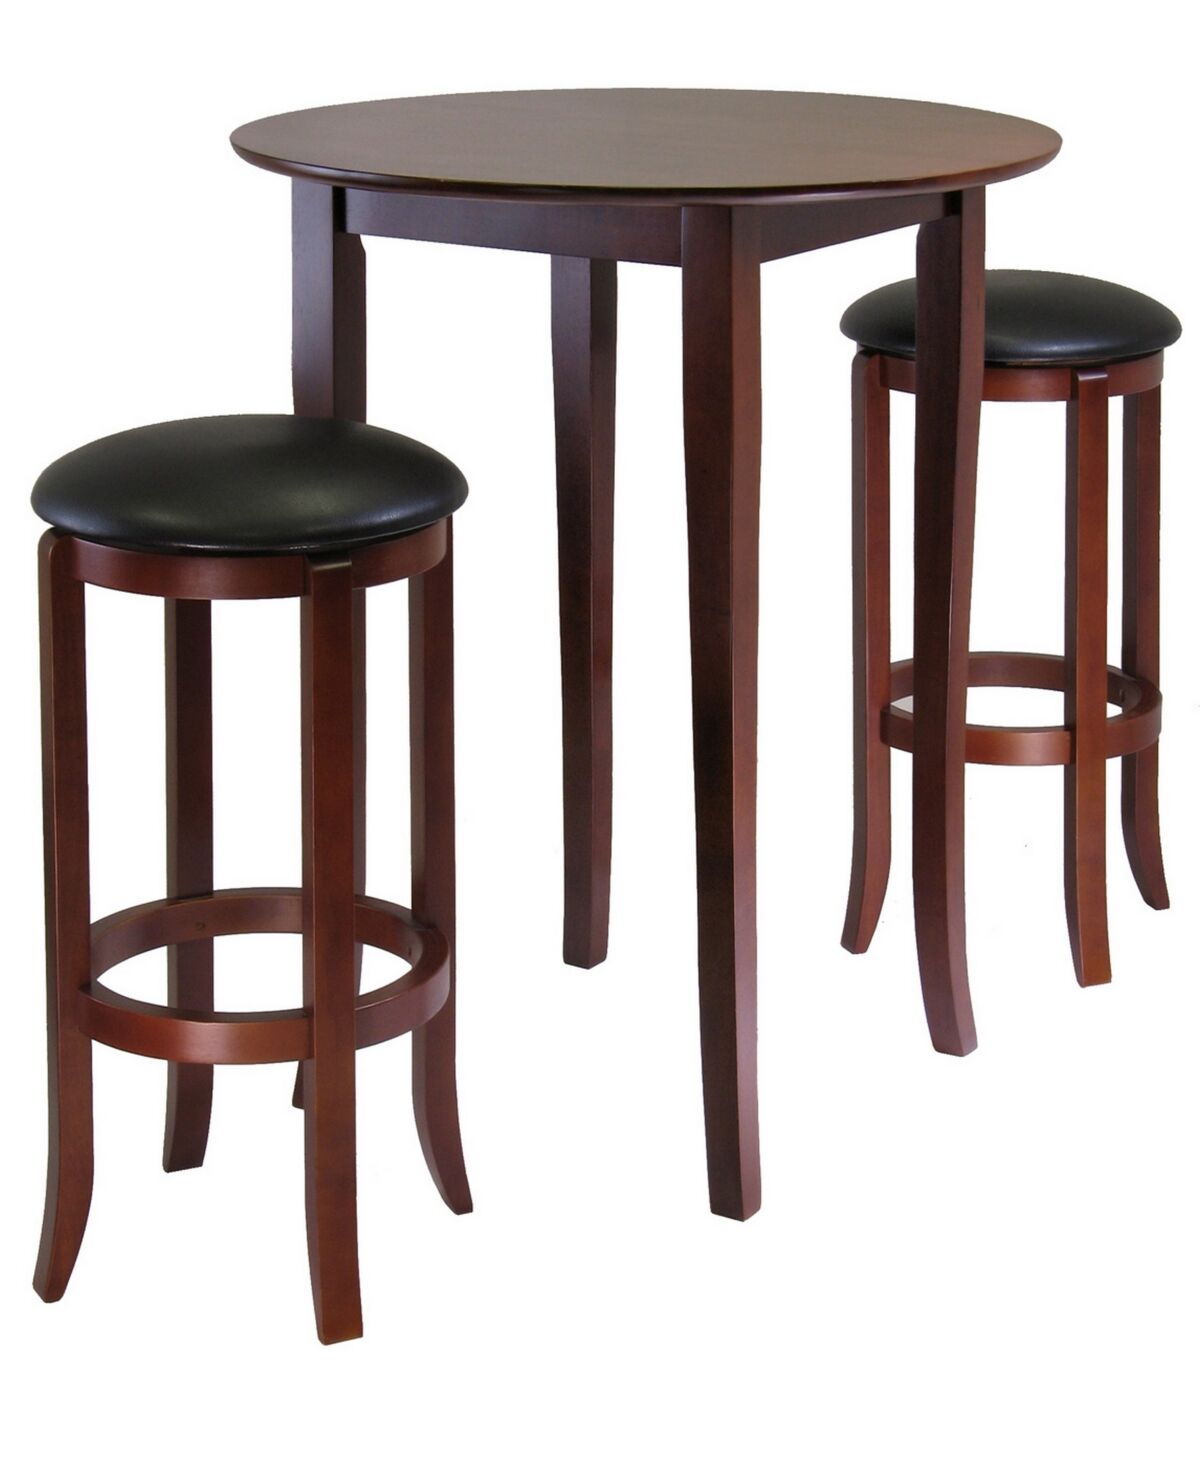 Winsome Fiona Round 3-Piece High/Pub Table Set - Brown